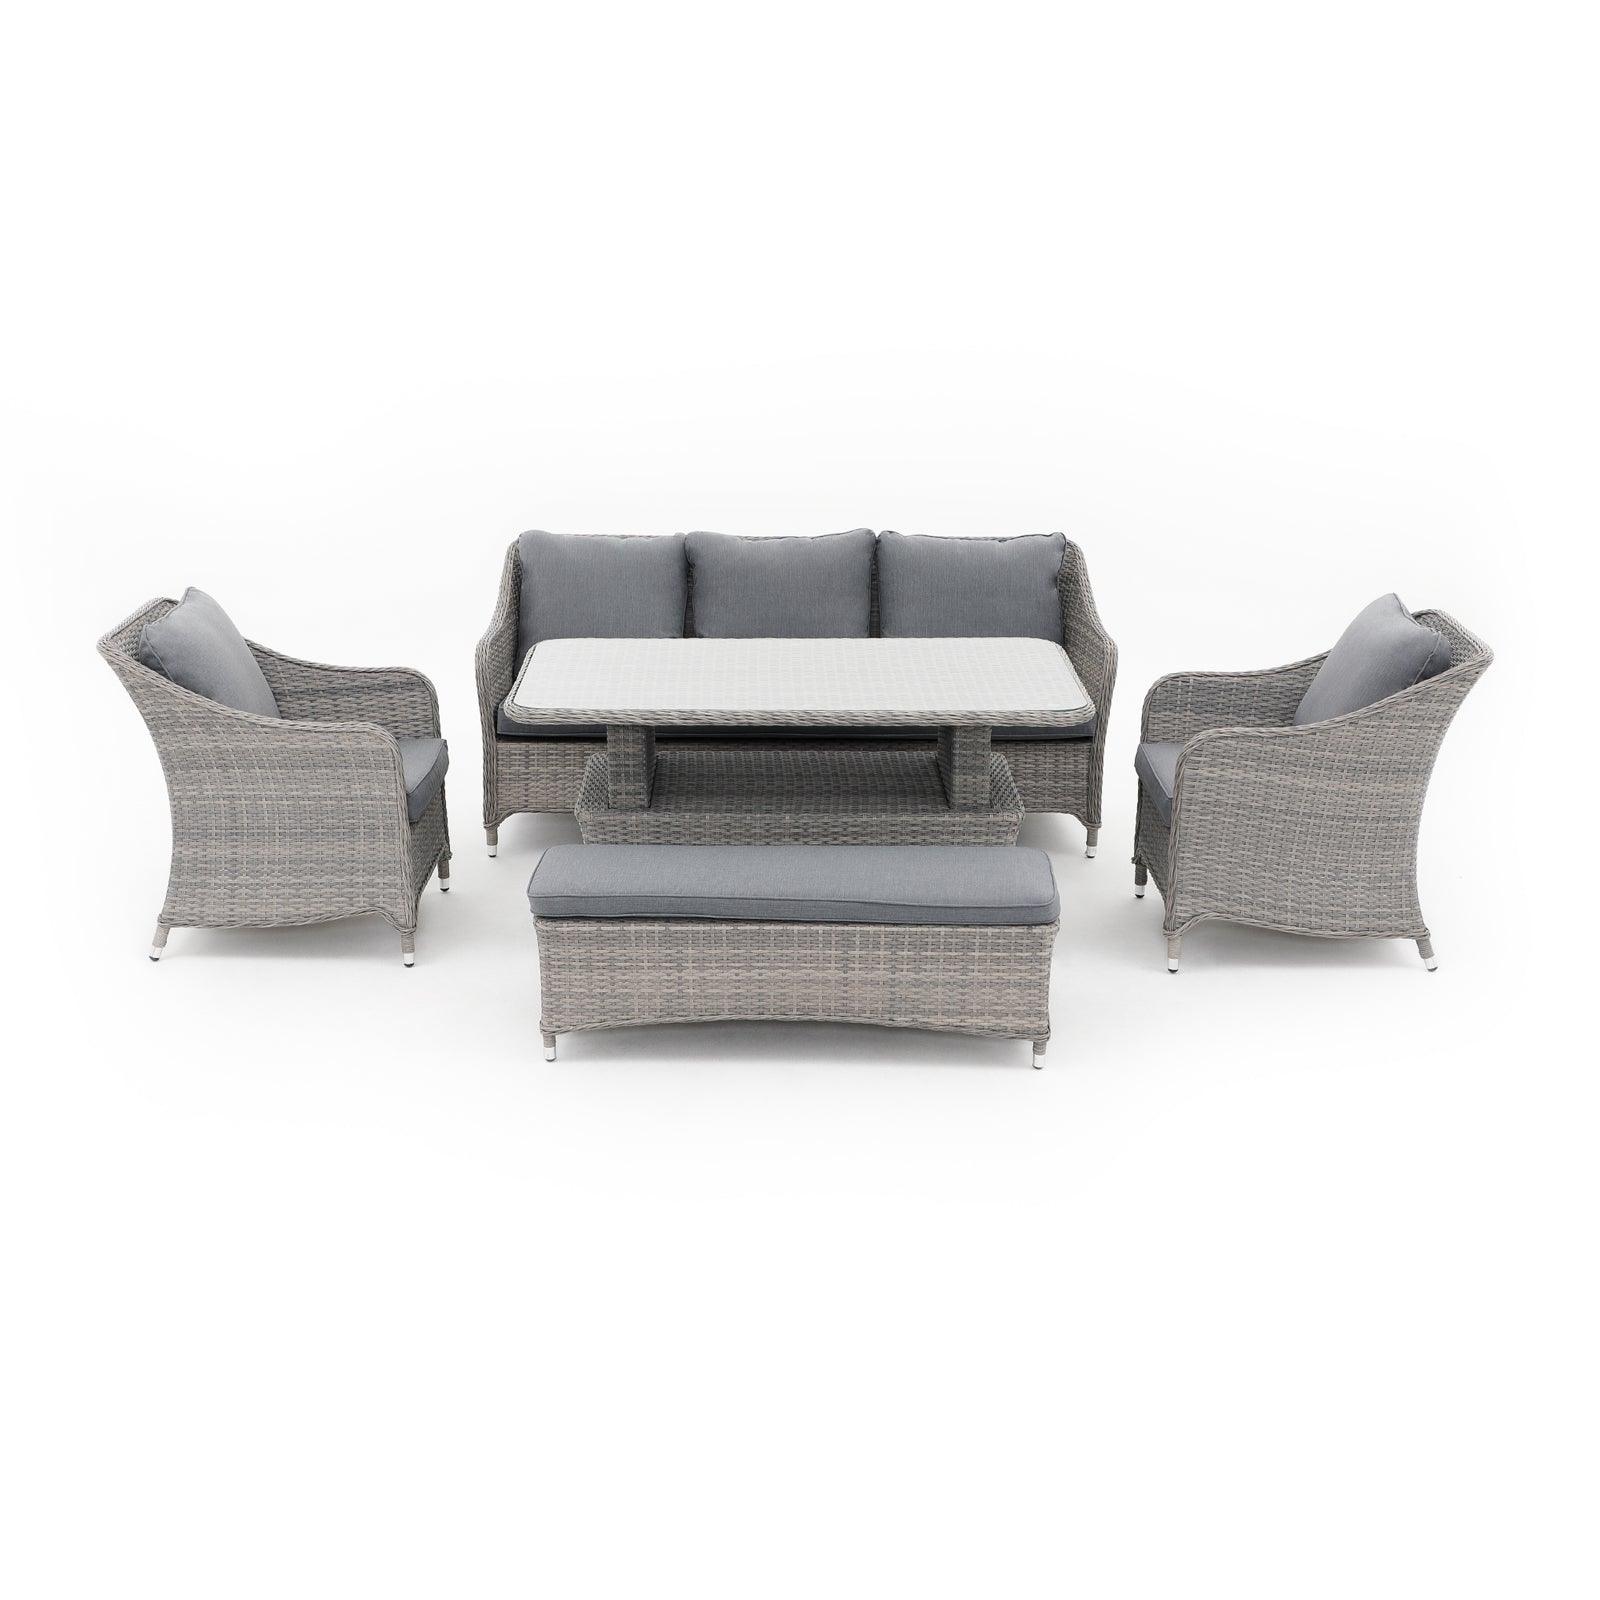 Irati 5-Piece grey wicker outdoor seating set with aluminum frame, grey cushions, 1 three-seater sofa, 2 dining chairs , 1 ottoman, 1 lift top table - Jardina Furniture#color_Grey